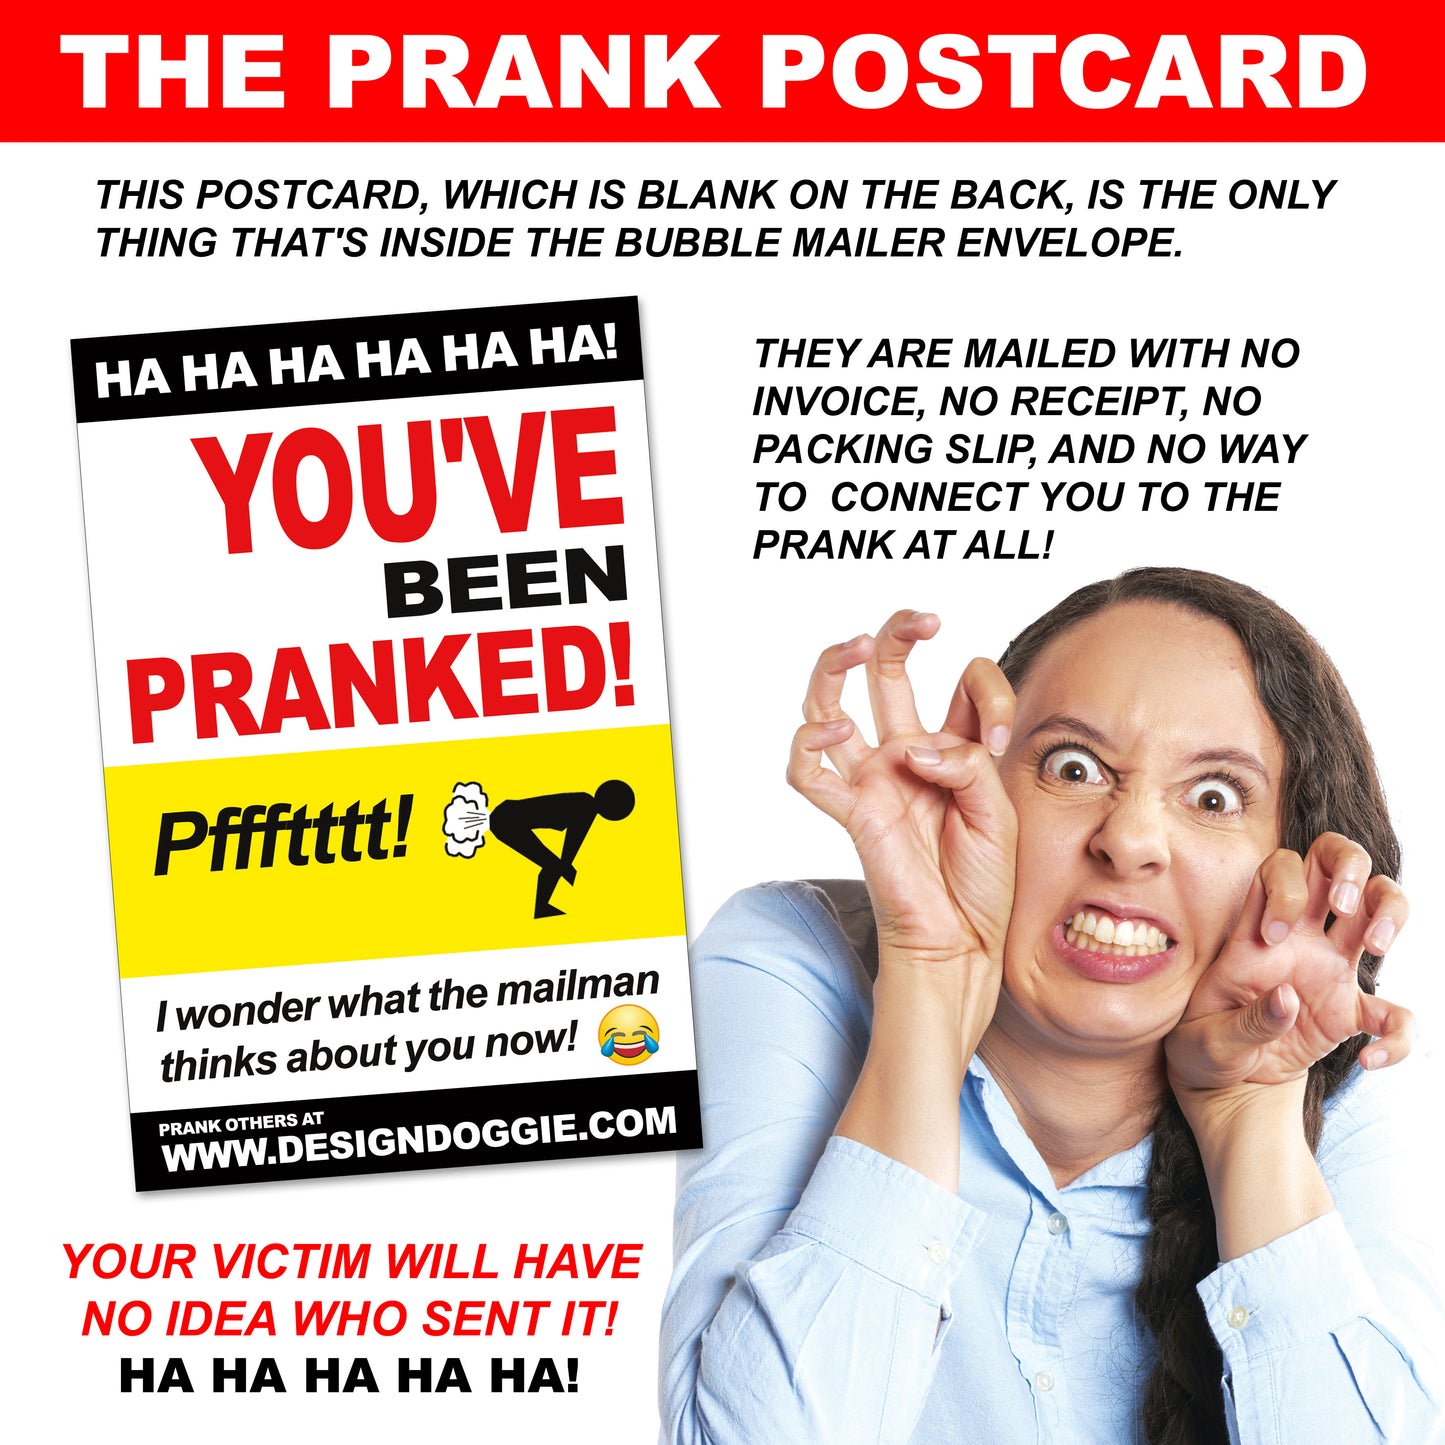 Naked Maid Service embarrassing prank envelope gets mailed directly to your victims 100% anonymously!